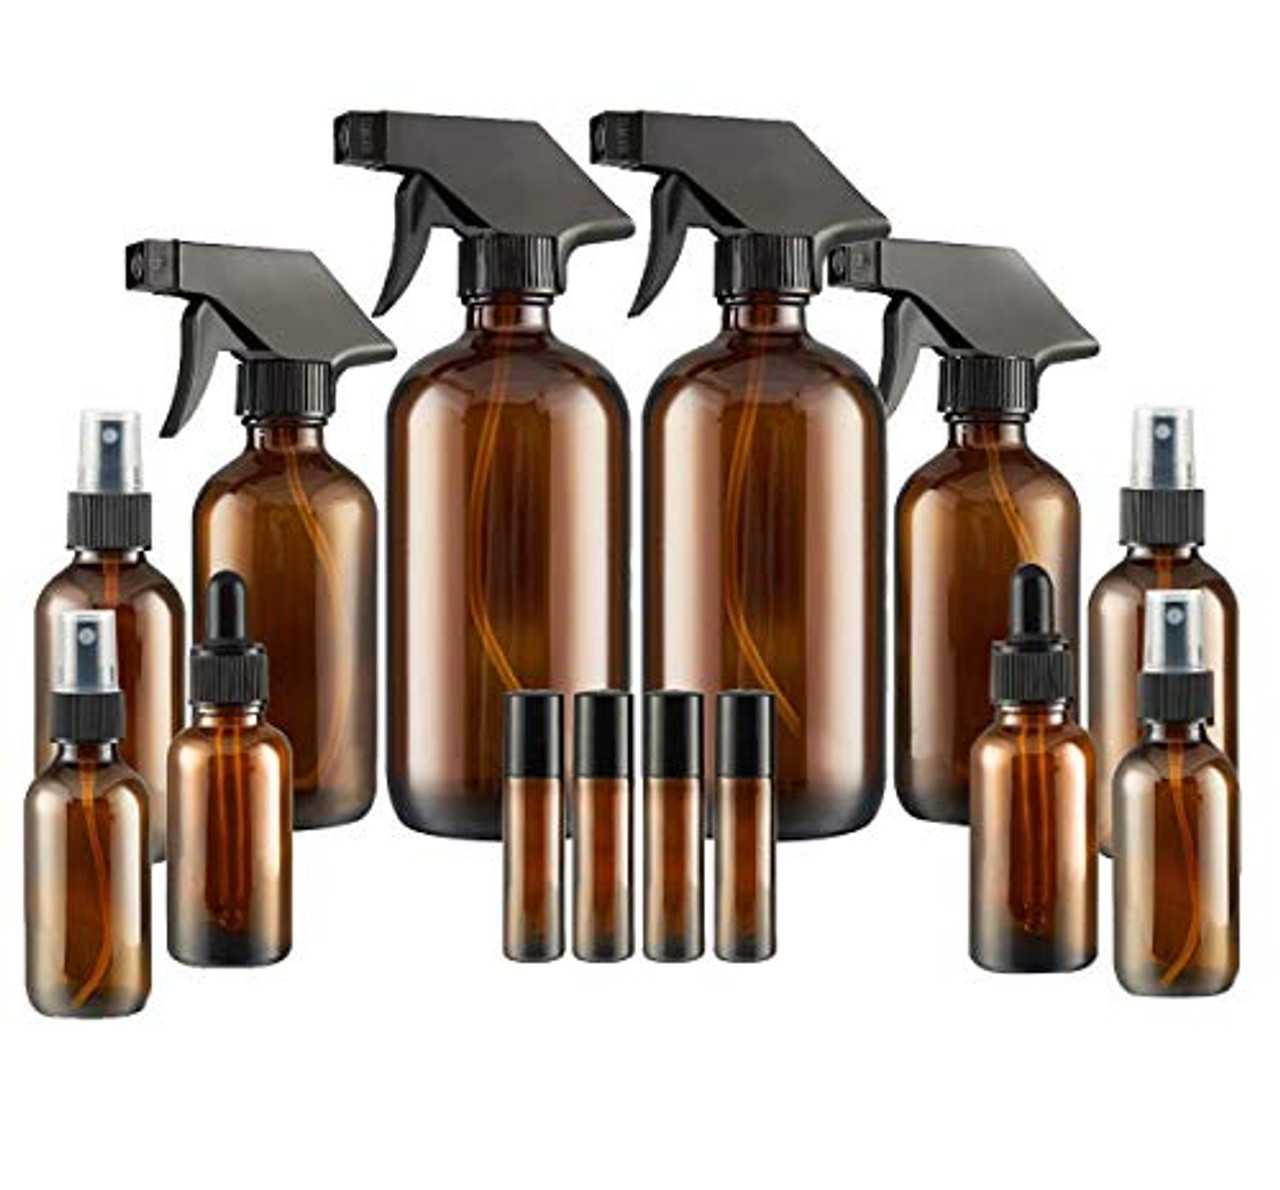 4oz Amber Glass Dropper Bottles (6-Pack), Refillable Glass Bottles for  Essential Oils, Cosmetics, and Cooking Amber Brown